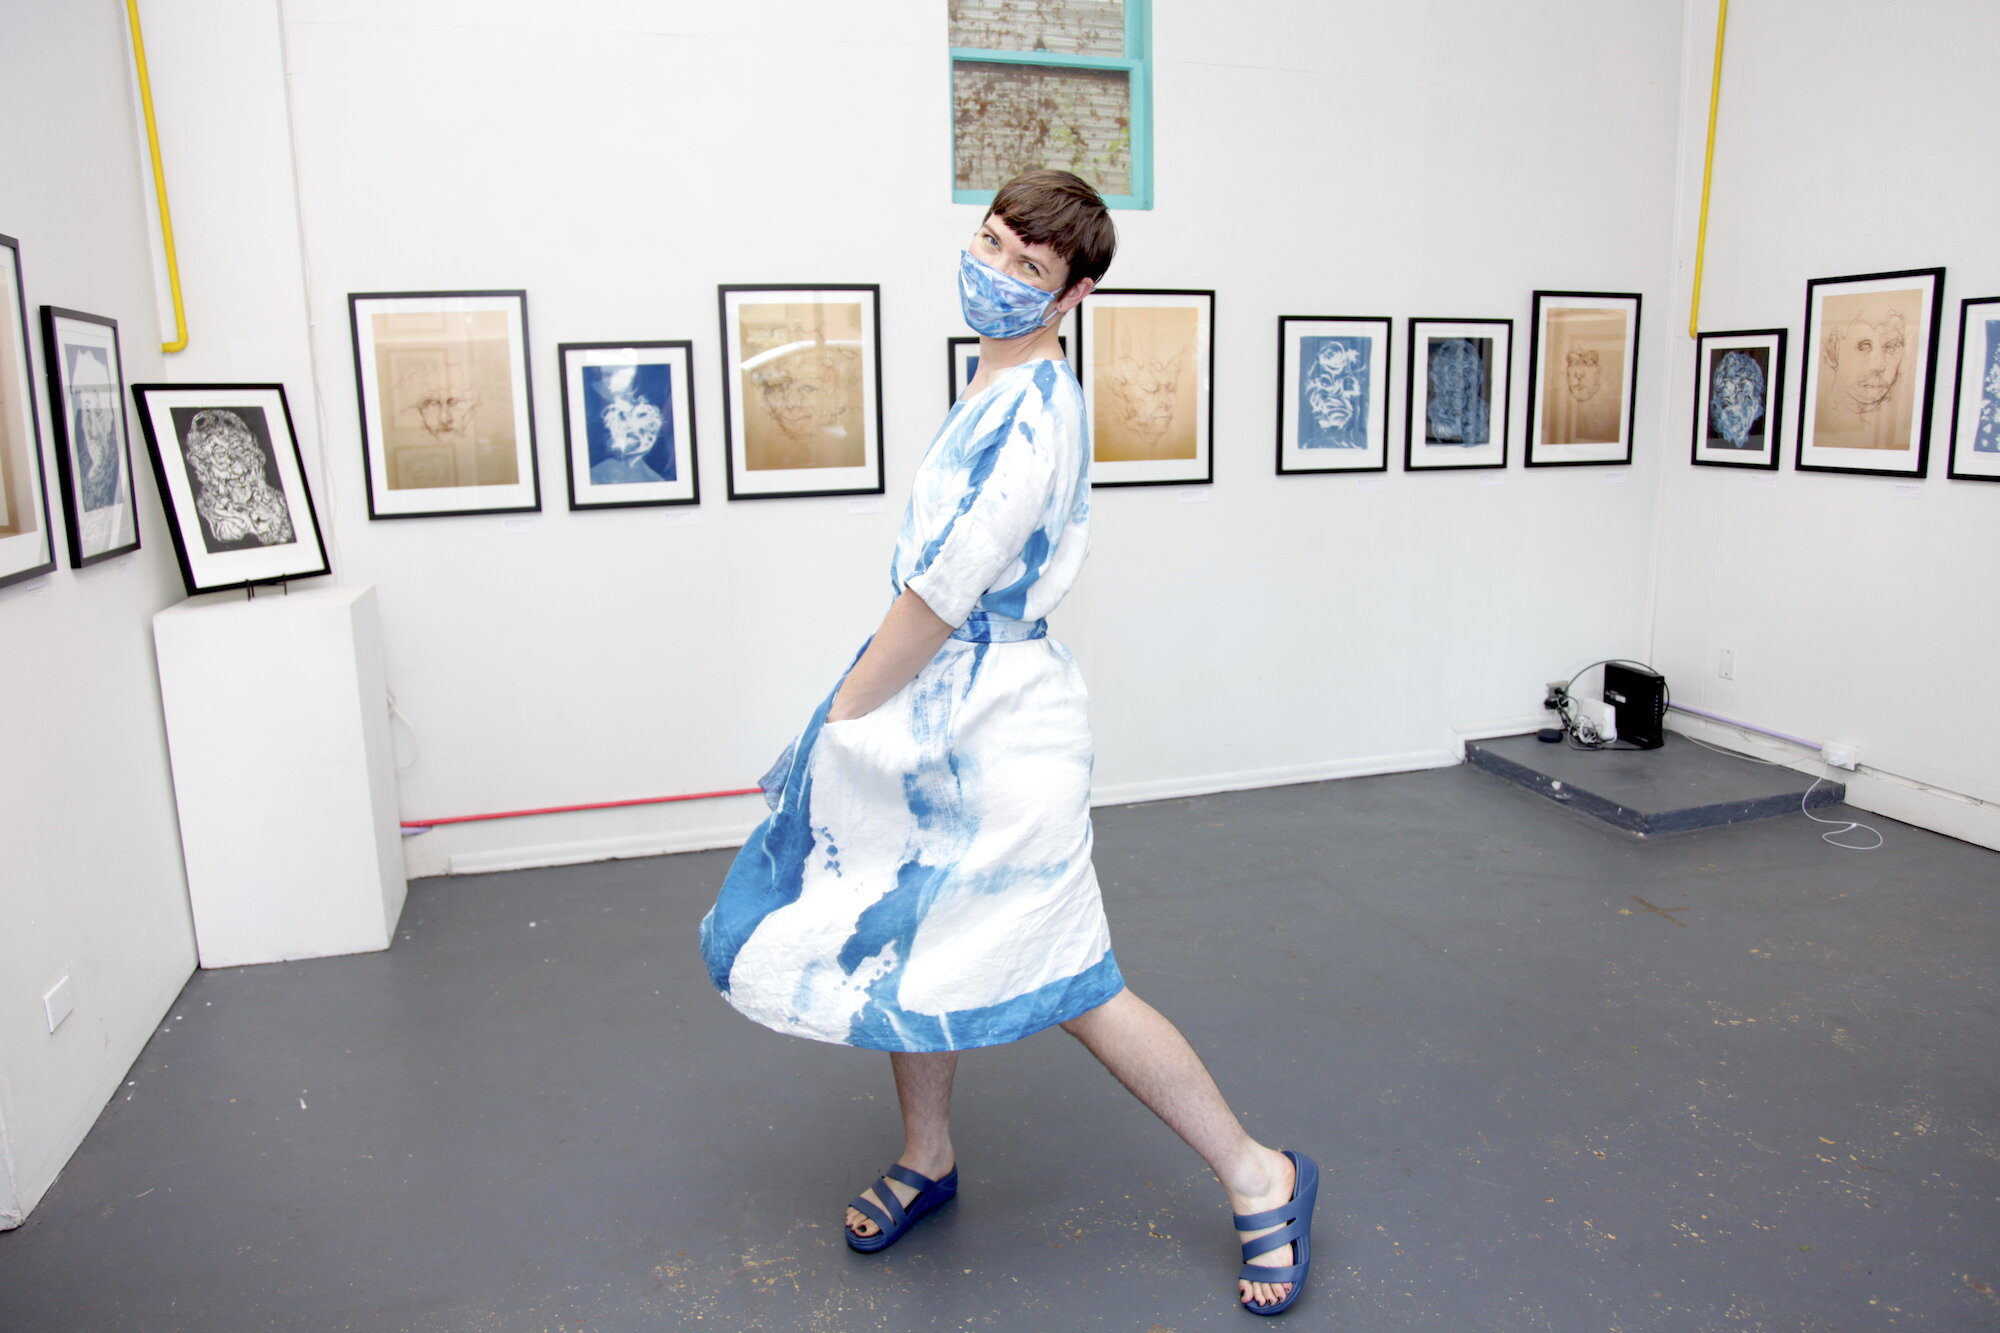    Rachel Mulder   with her exhibition at   Radius Annex  , August 6th, 2021  © Shannon O’Connor 